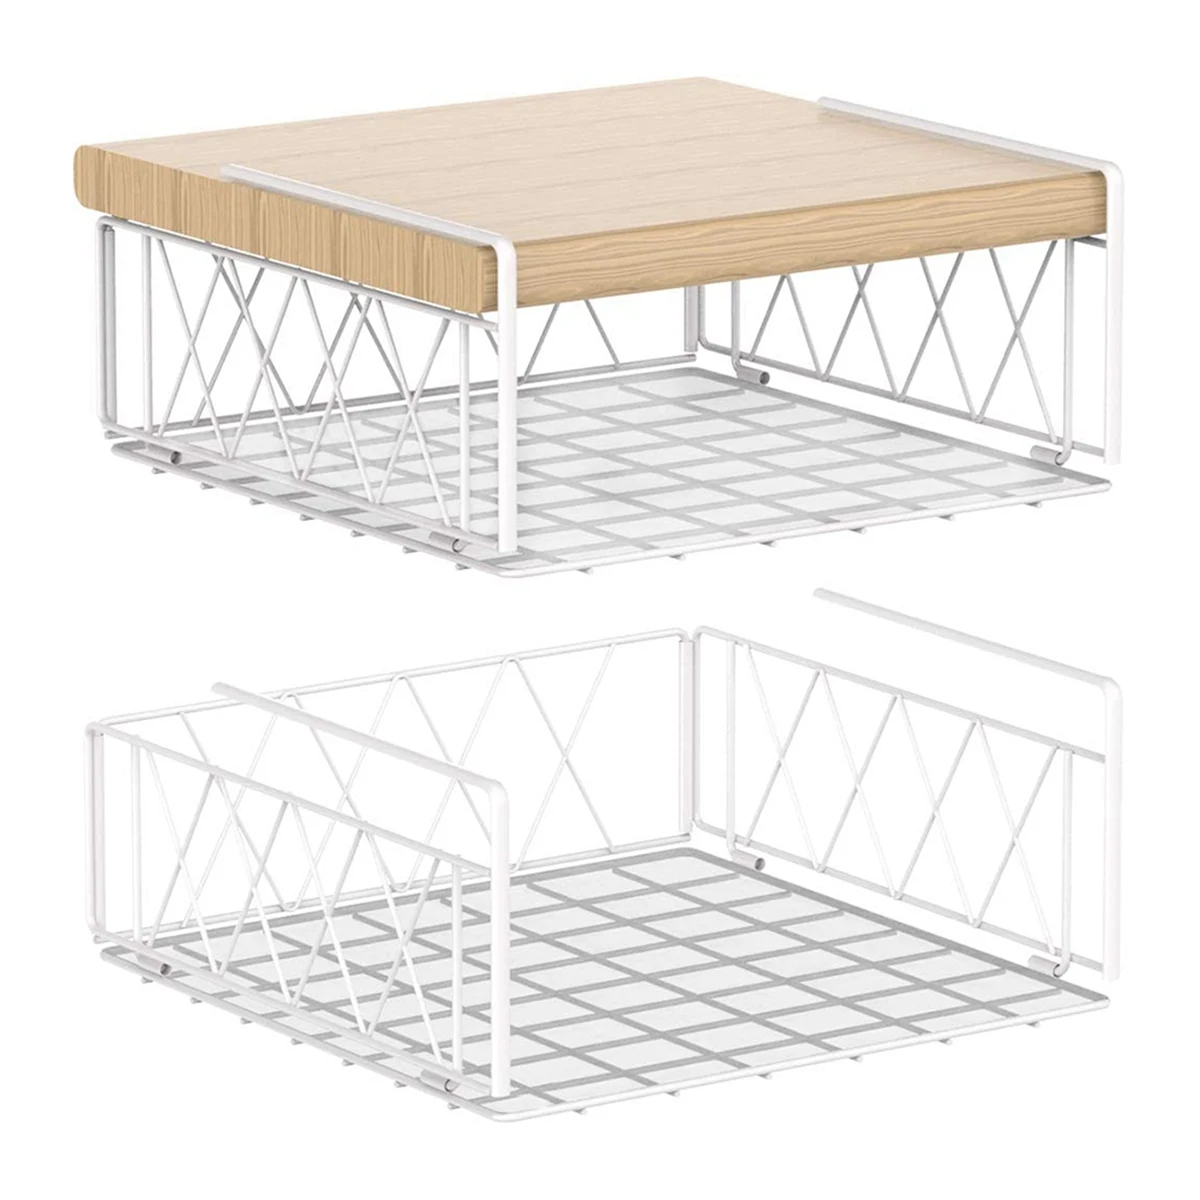 

Auledio Under the Cabinet Shelf Rack,Vertical Wire Rack for Hanging Storage Baskets with Liner,White (2 Pack)